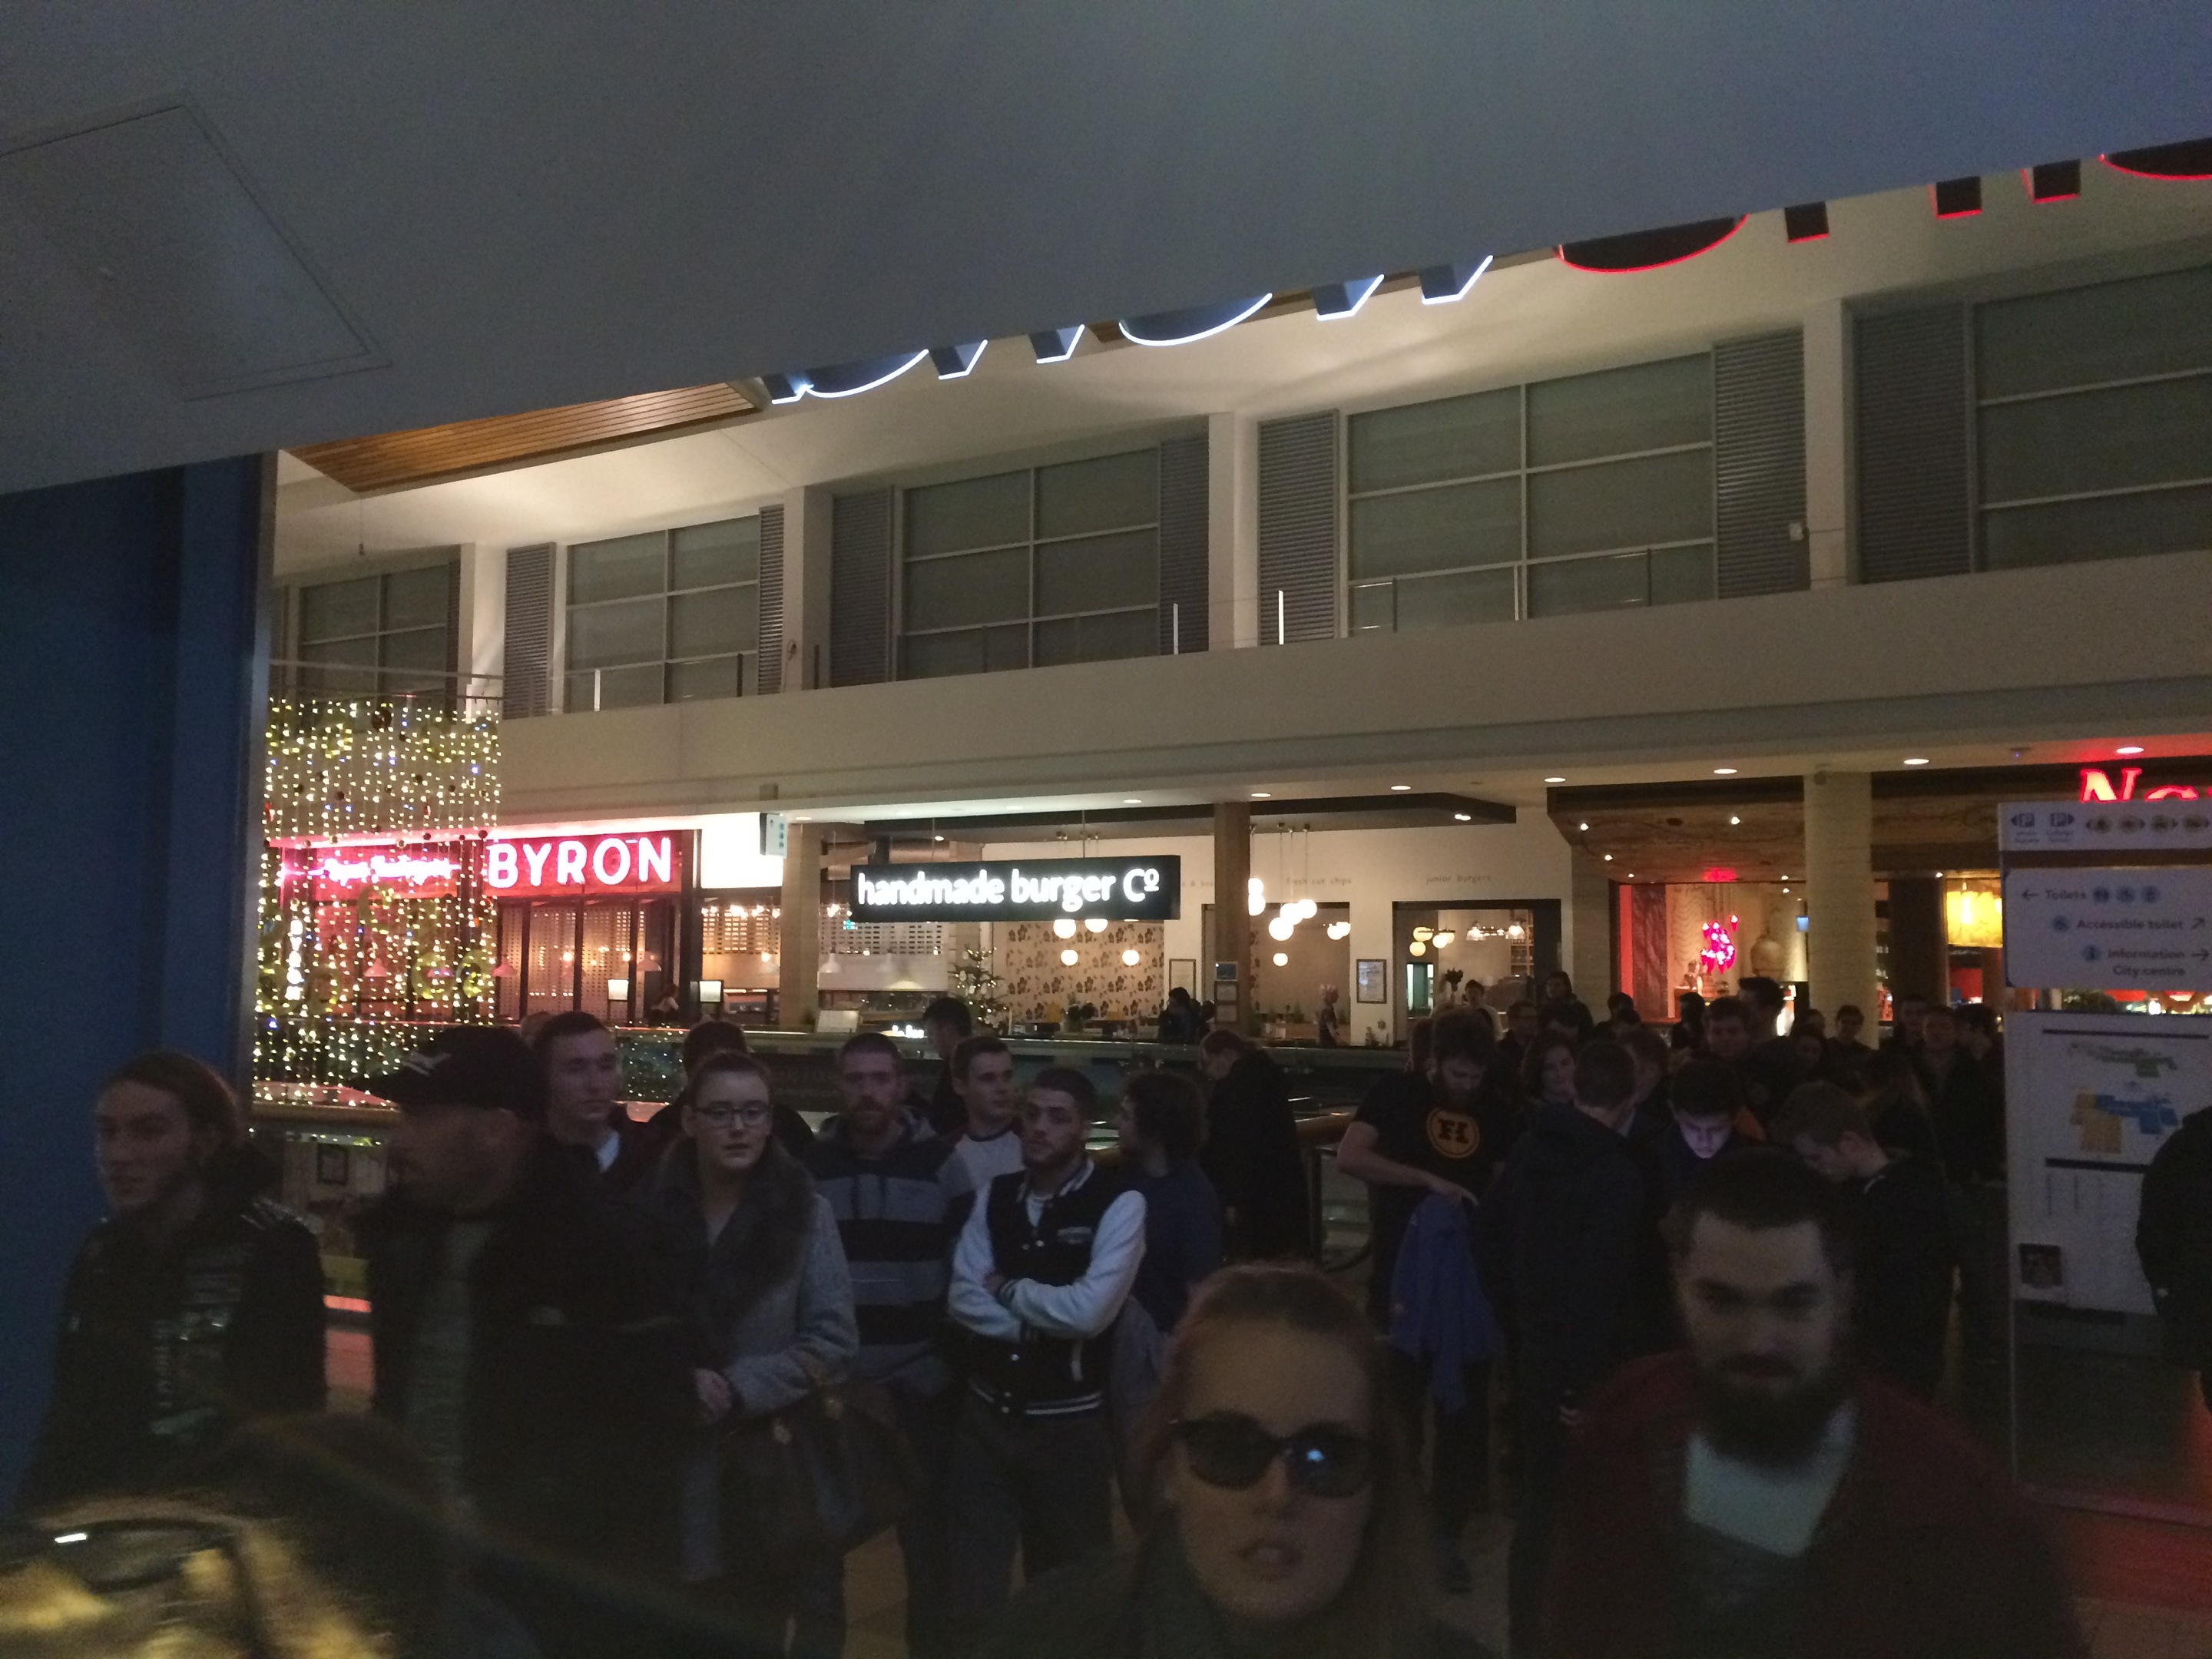 Midnight screenings of Star Wars: The Force Awakens in Aberdeen's Union Square